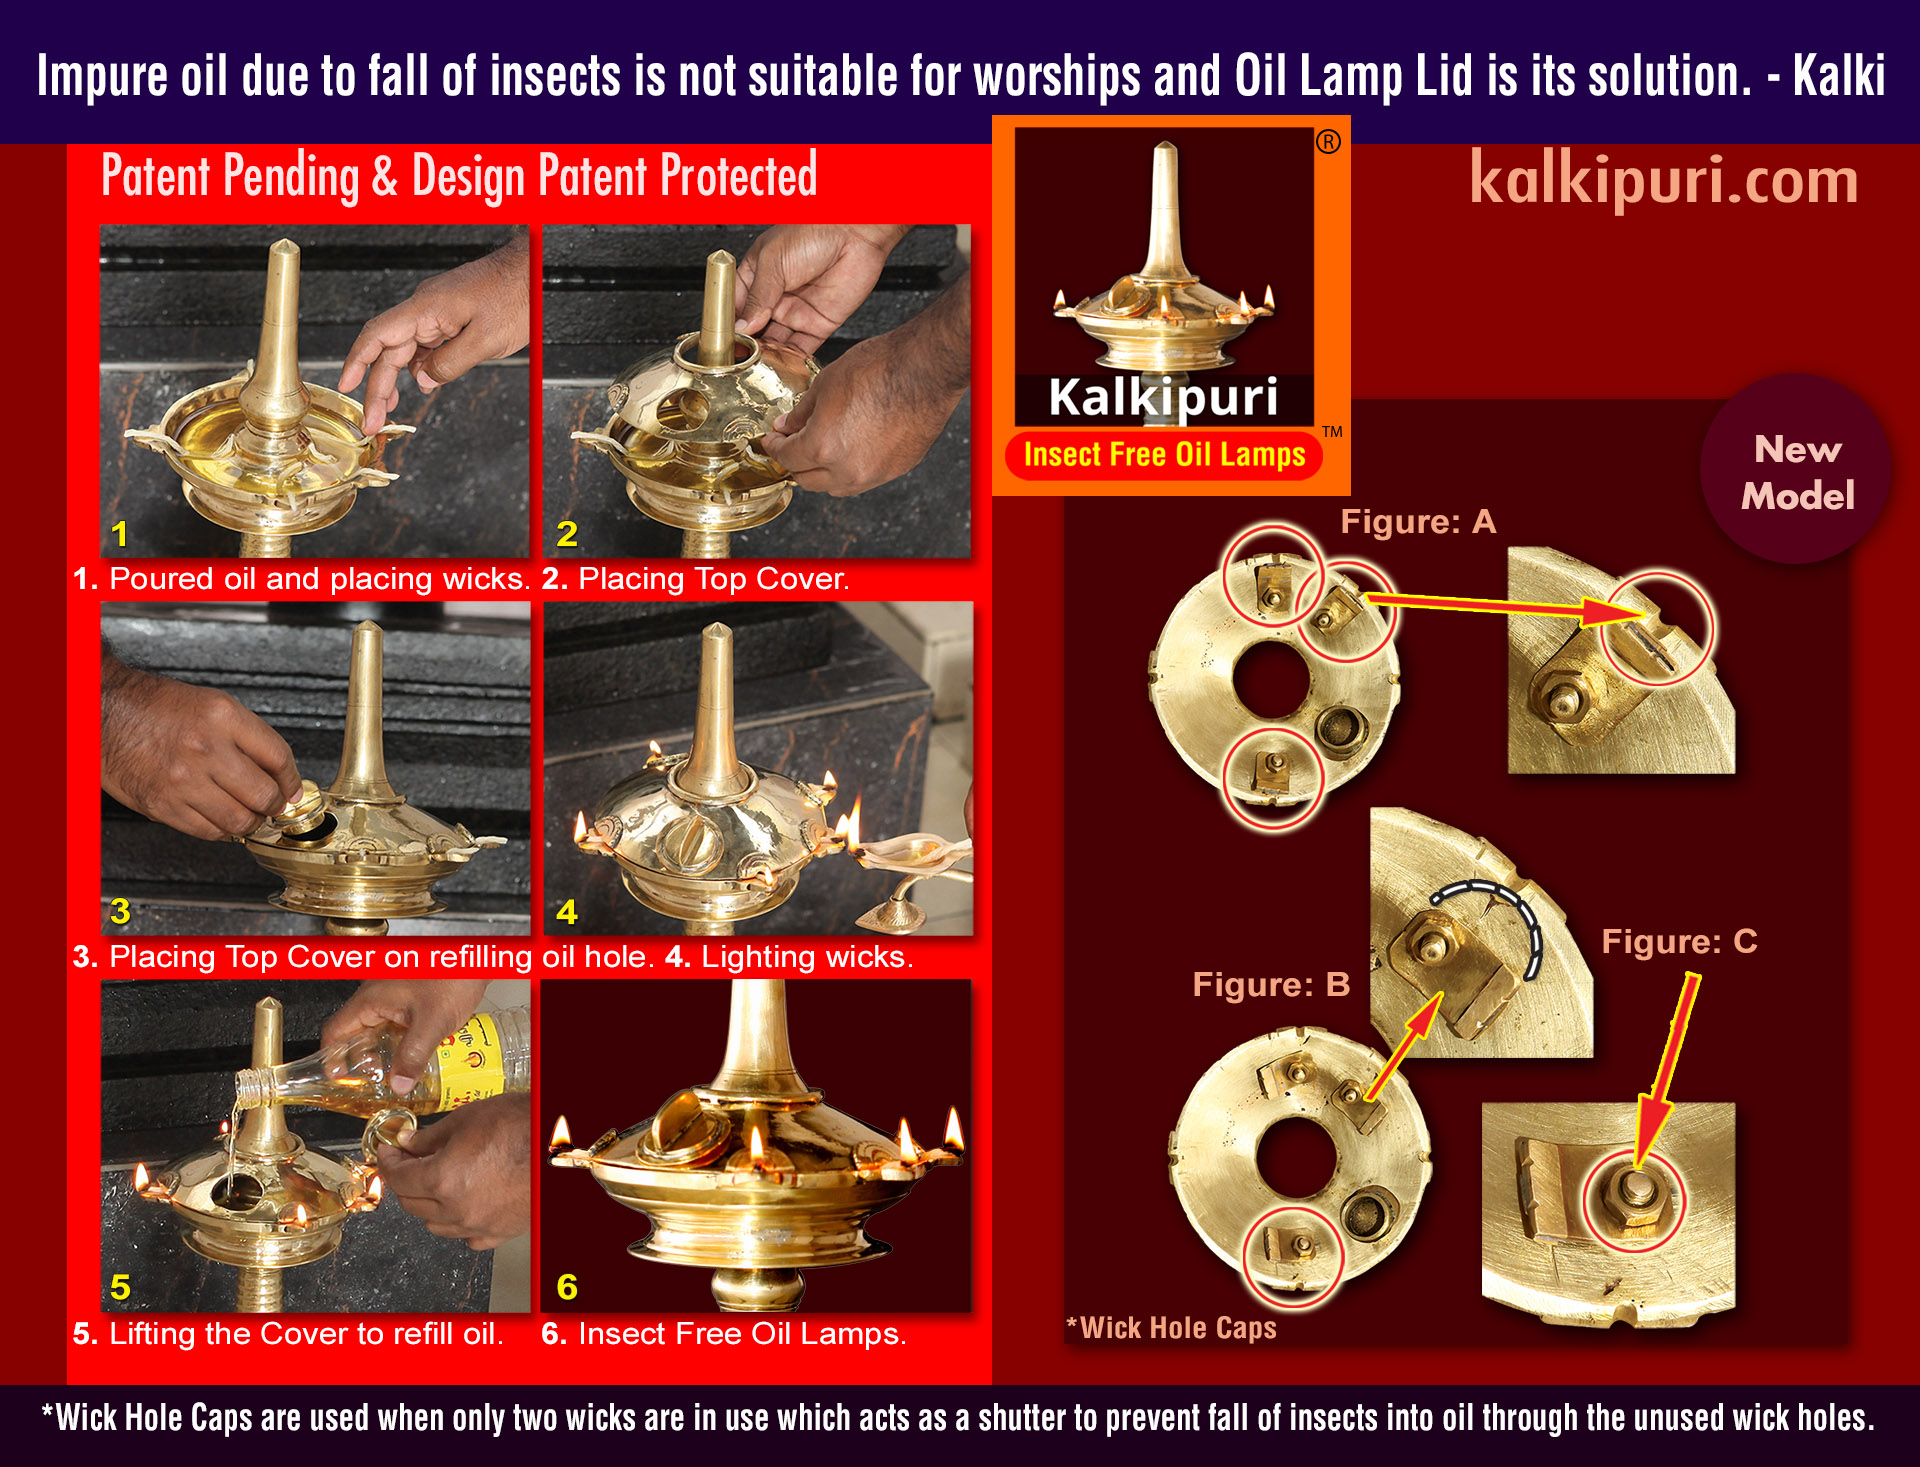 Kalkipuri Insect Free Oil Lamps 3